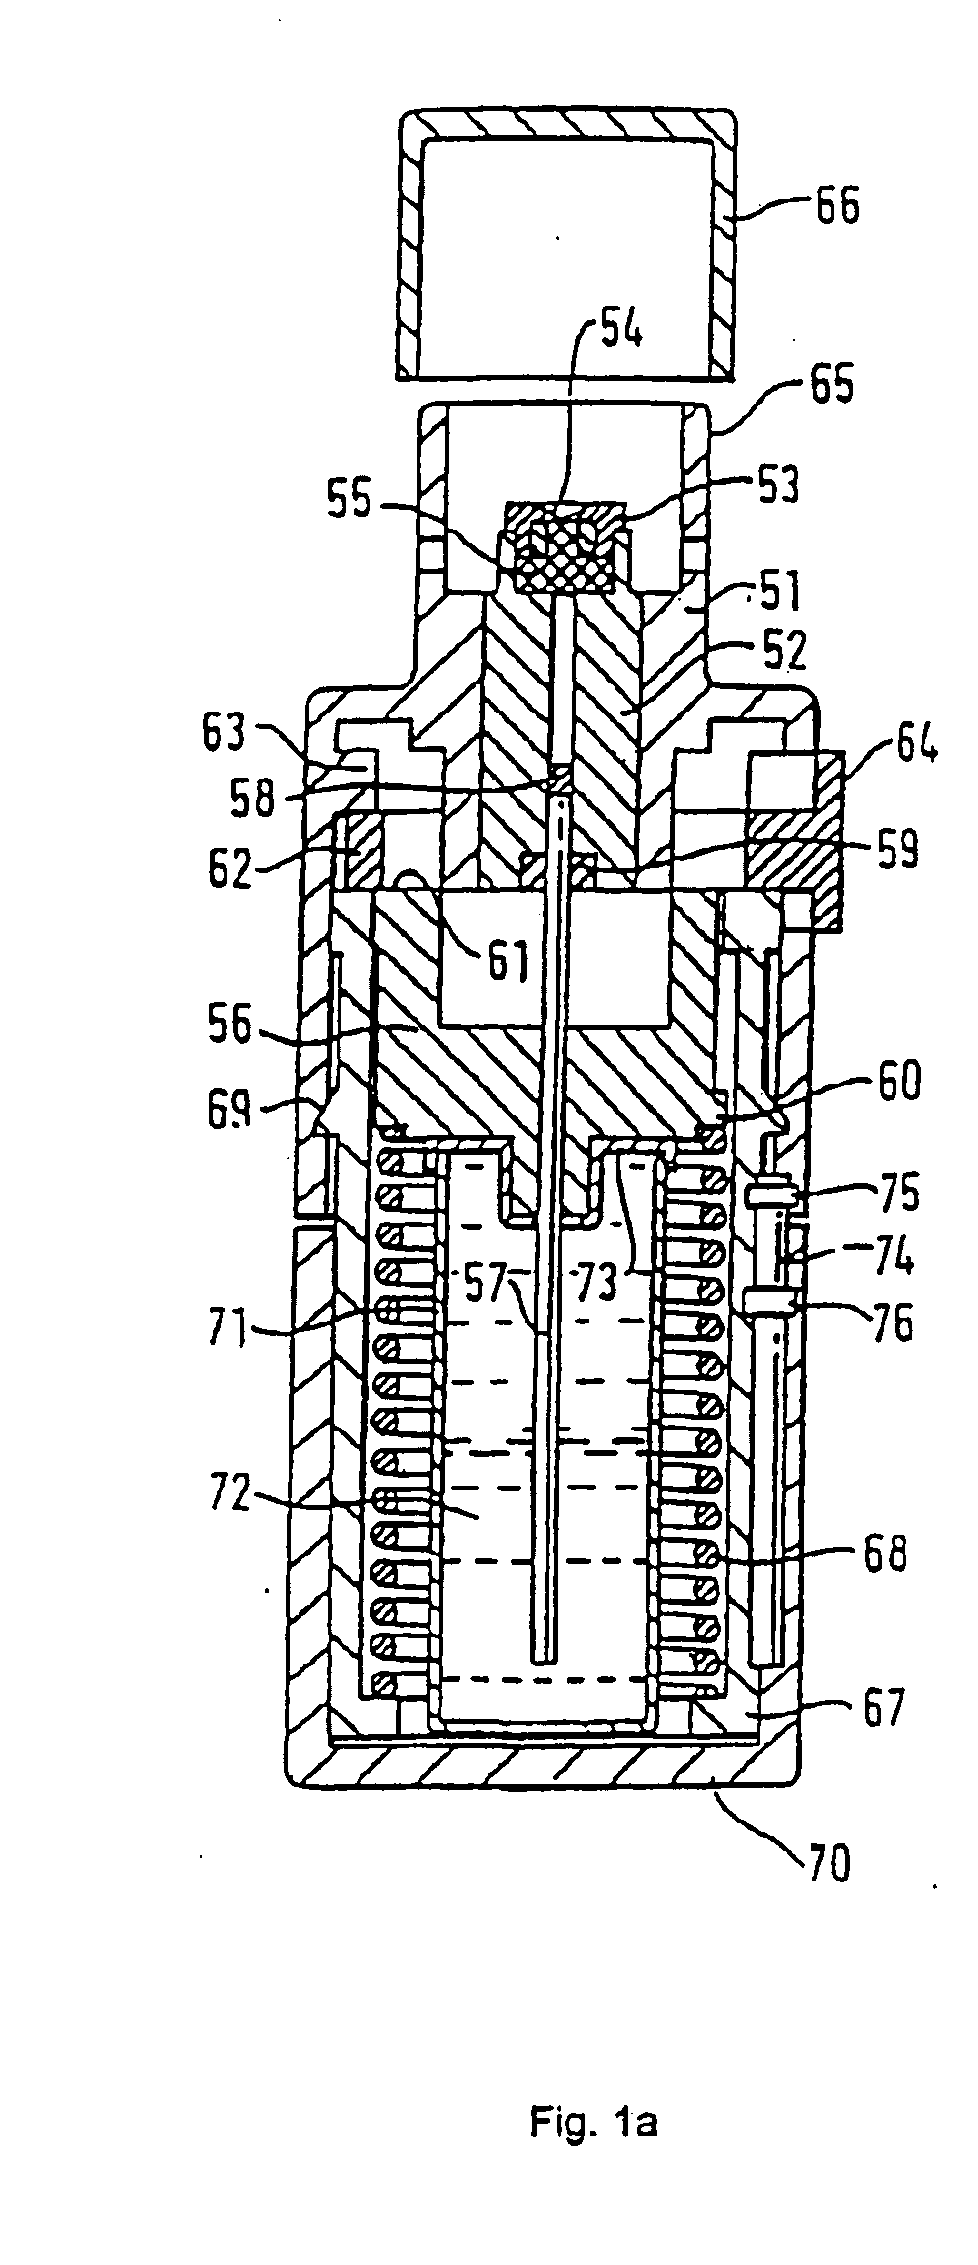 Nozzle-system for a dispenser for fluids consisting of a nozzle and a nozzle-holder and/or screw cap